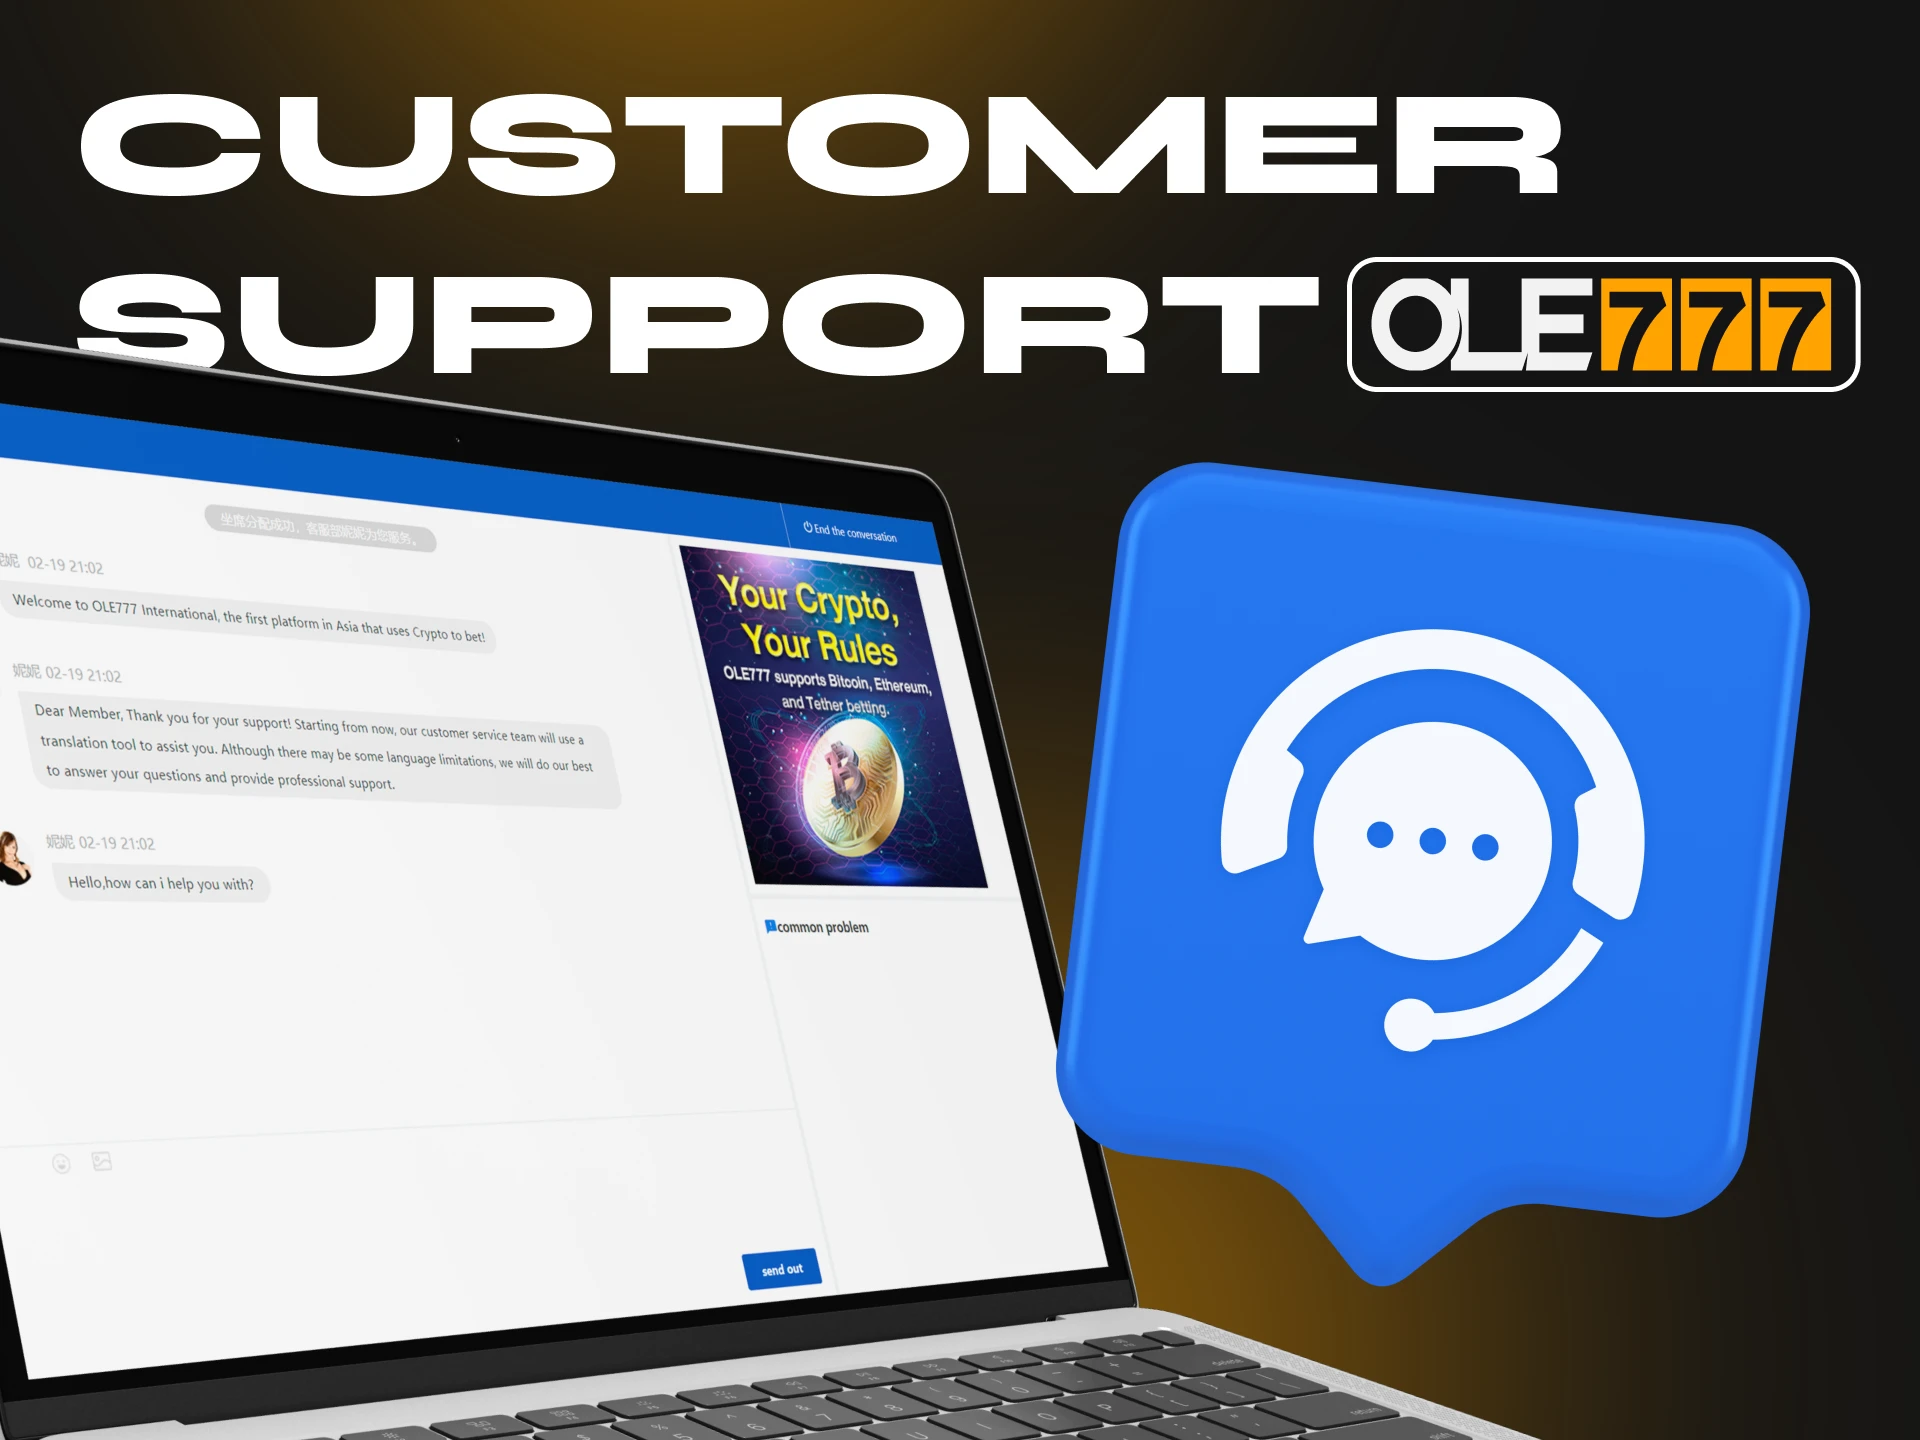 You can contact Ole777 Casino customer support at any time.